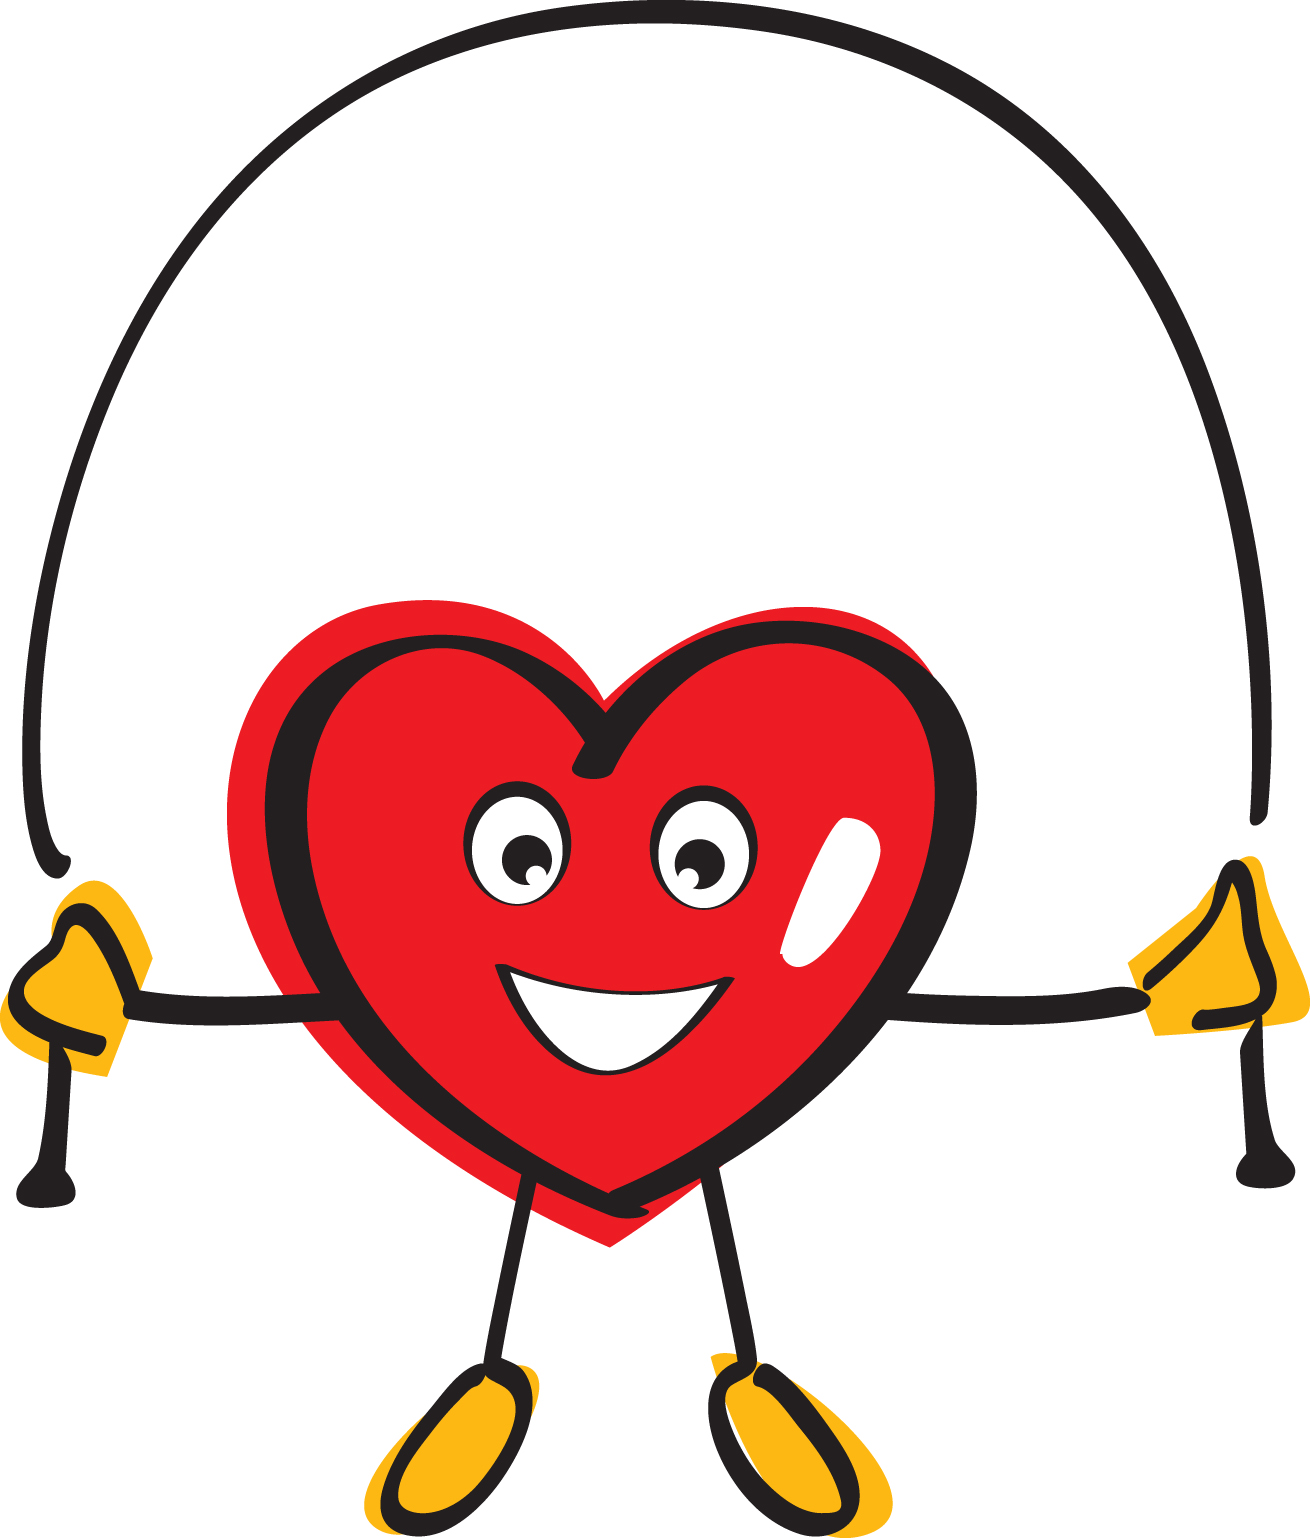 Jump rope for heart clipart